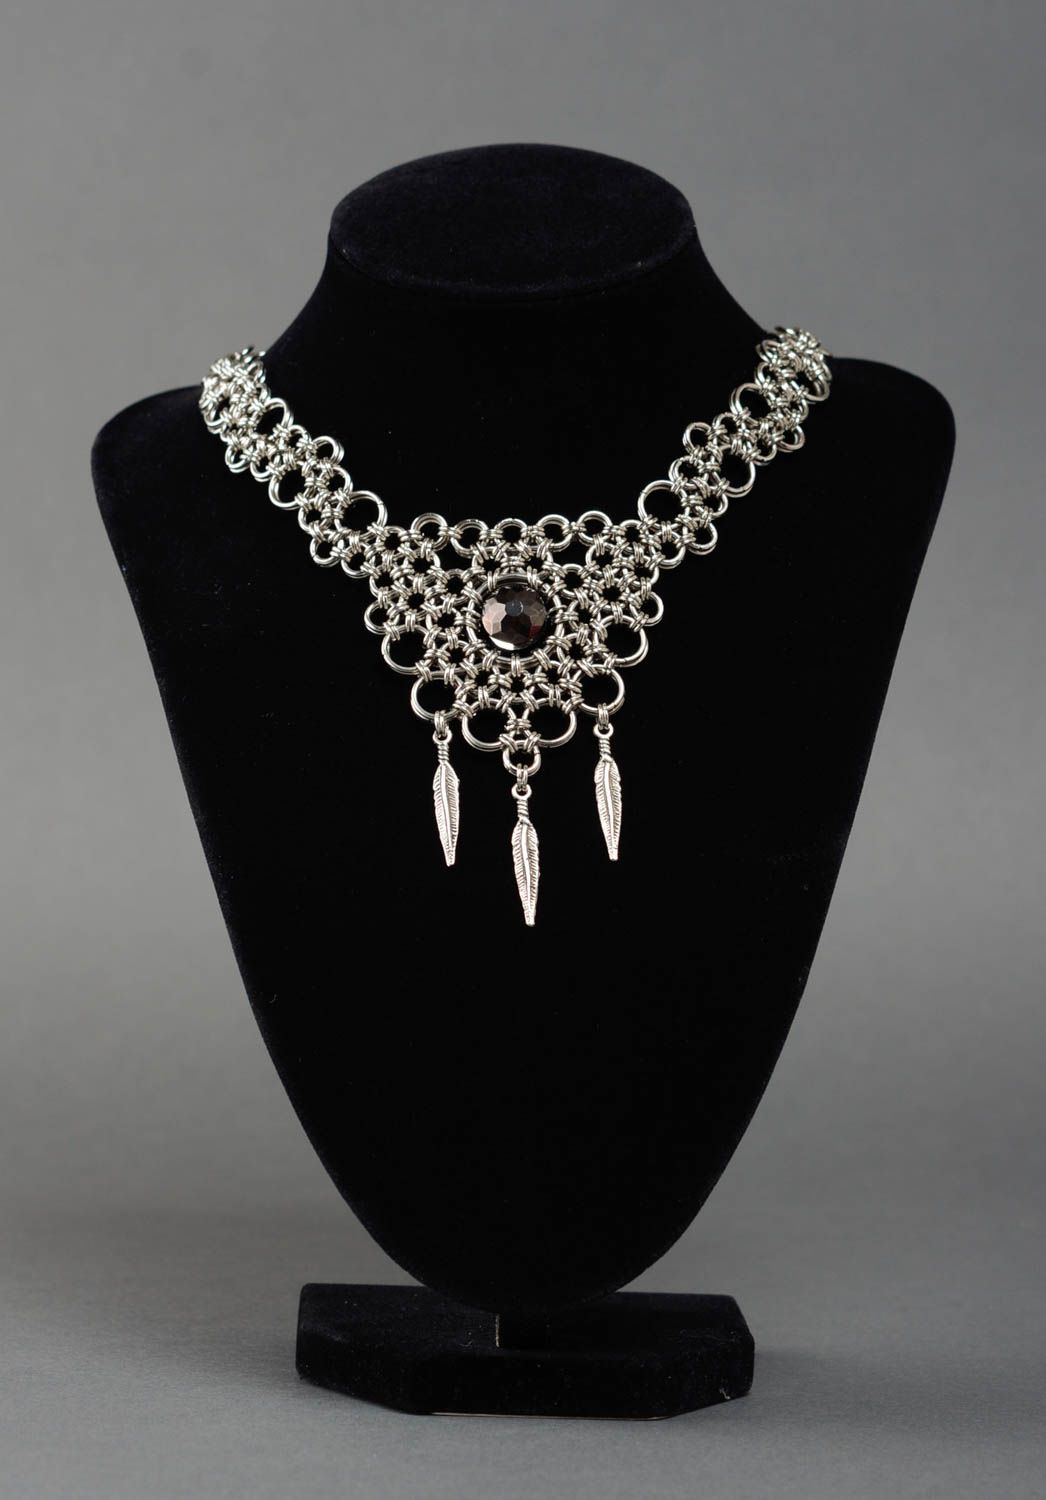 Handmade chainmail woven metal jewelry set 2 pieces necklace and earrings photo 2